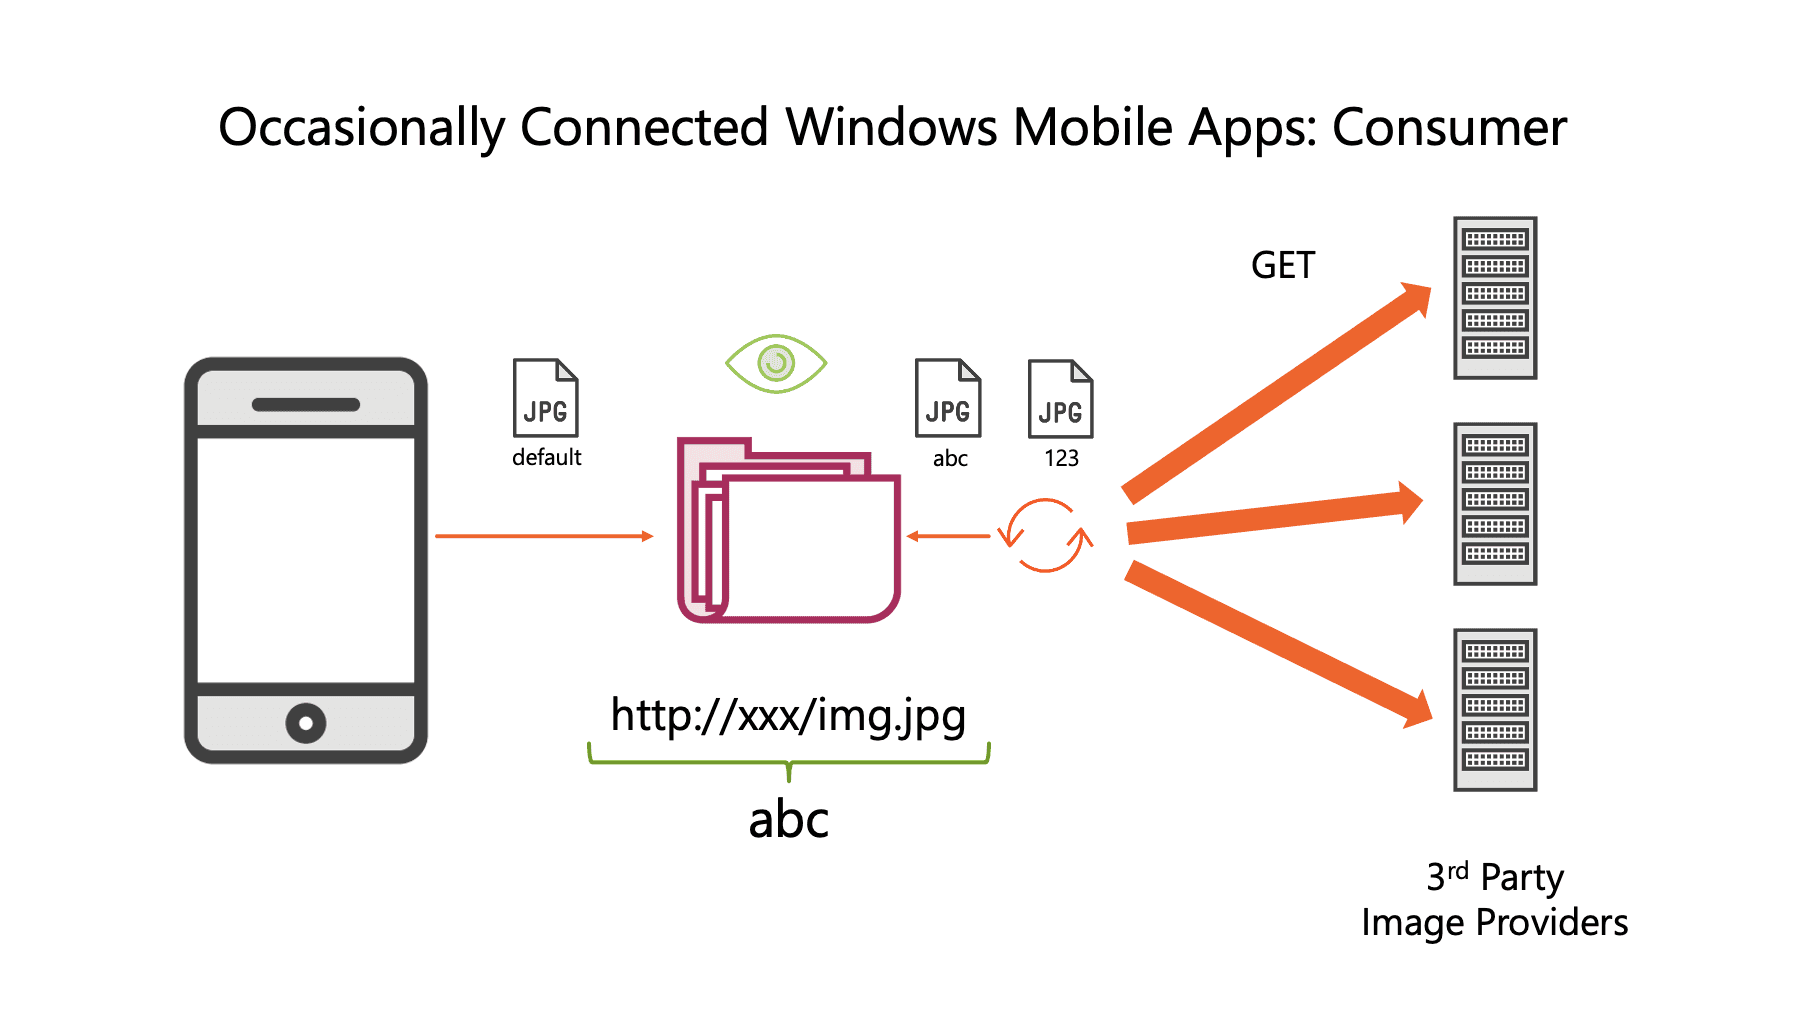 Occasionally Connected Windows Mobile Apps: Consumer